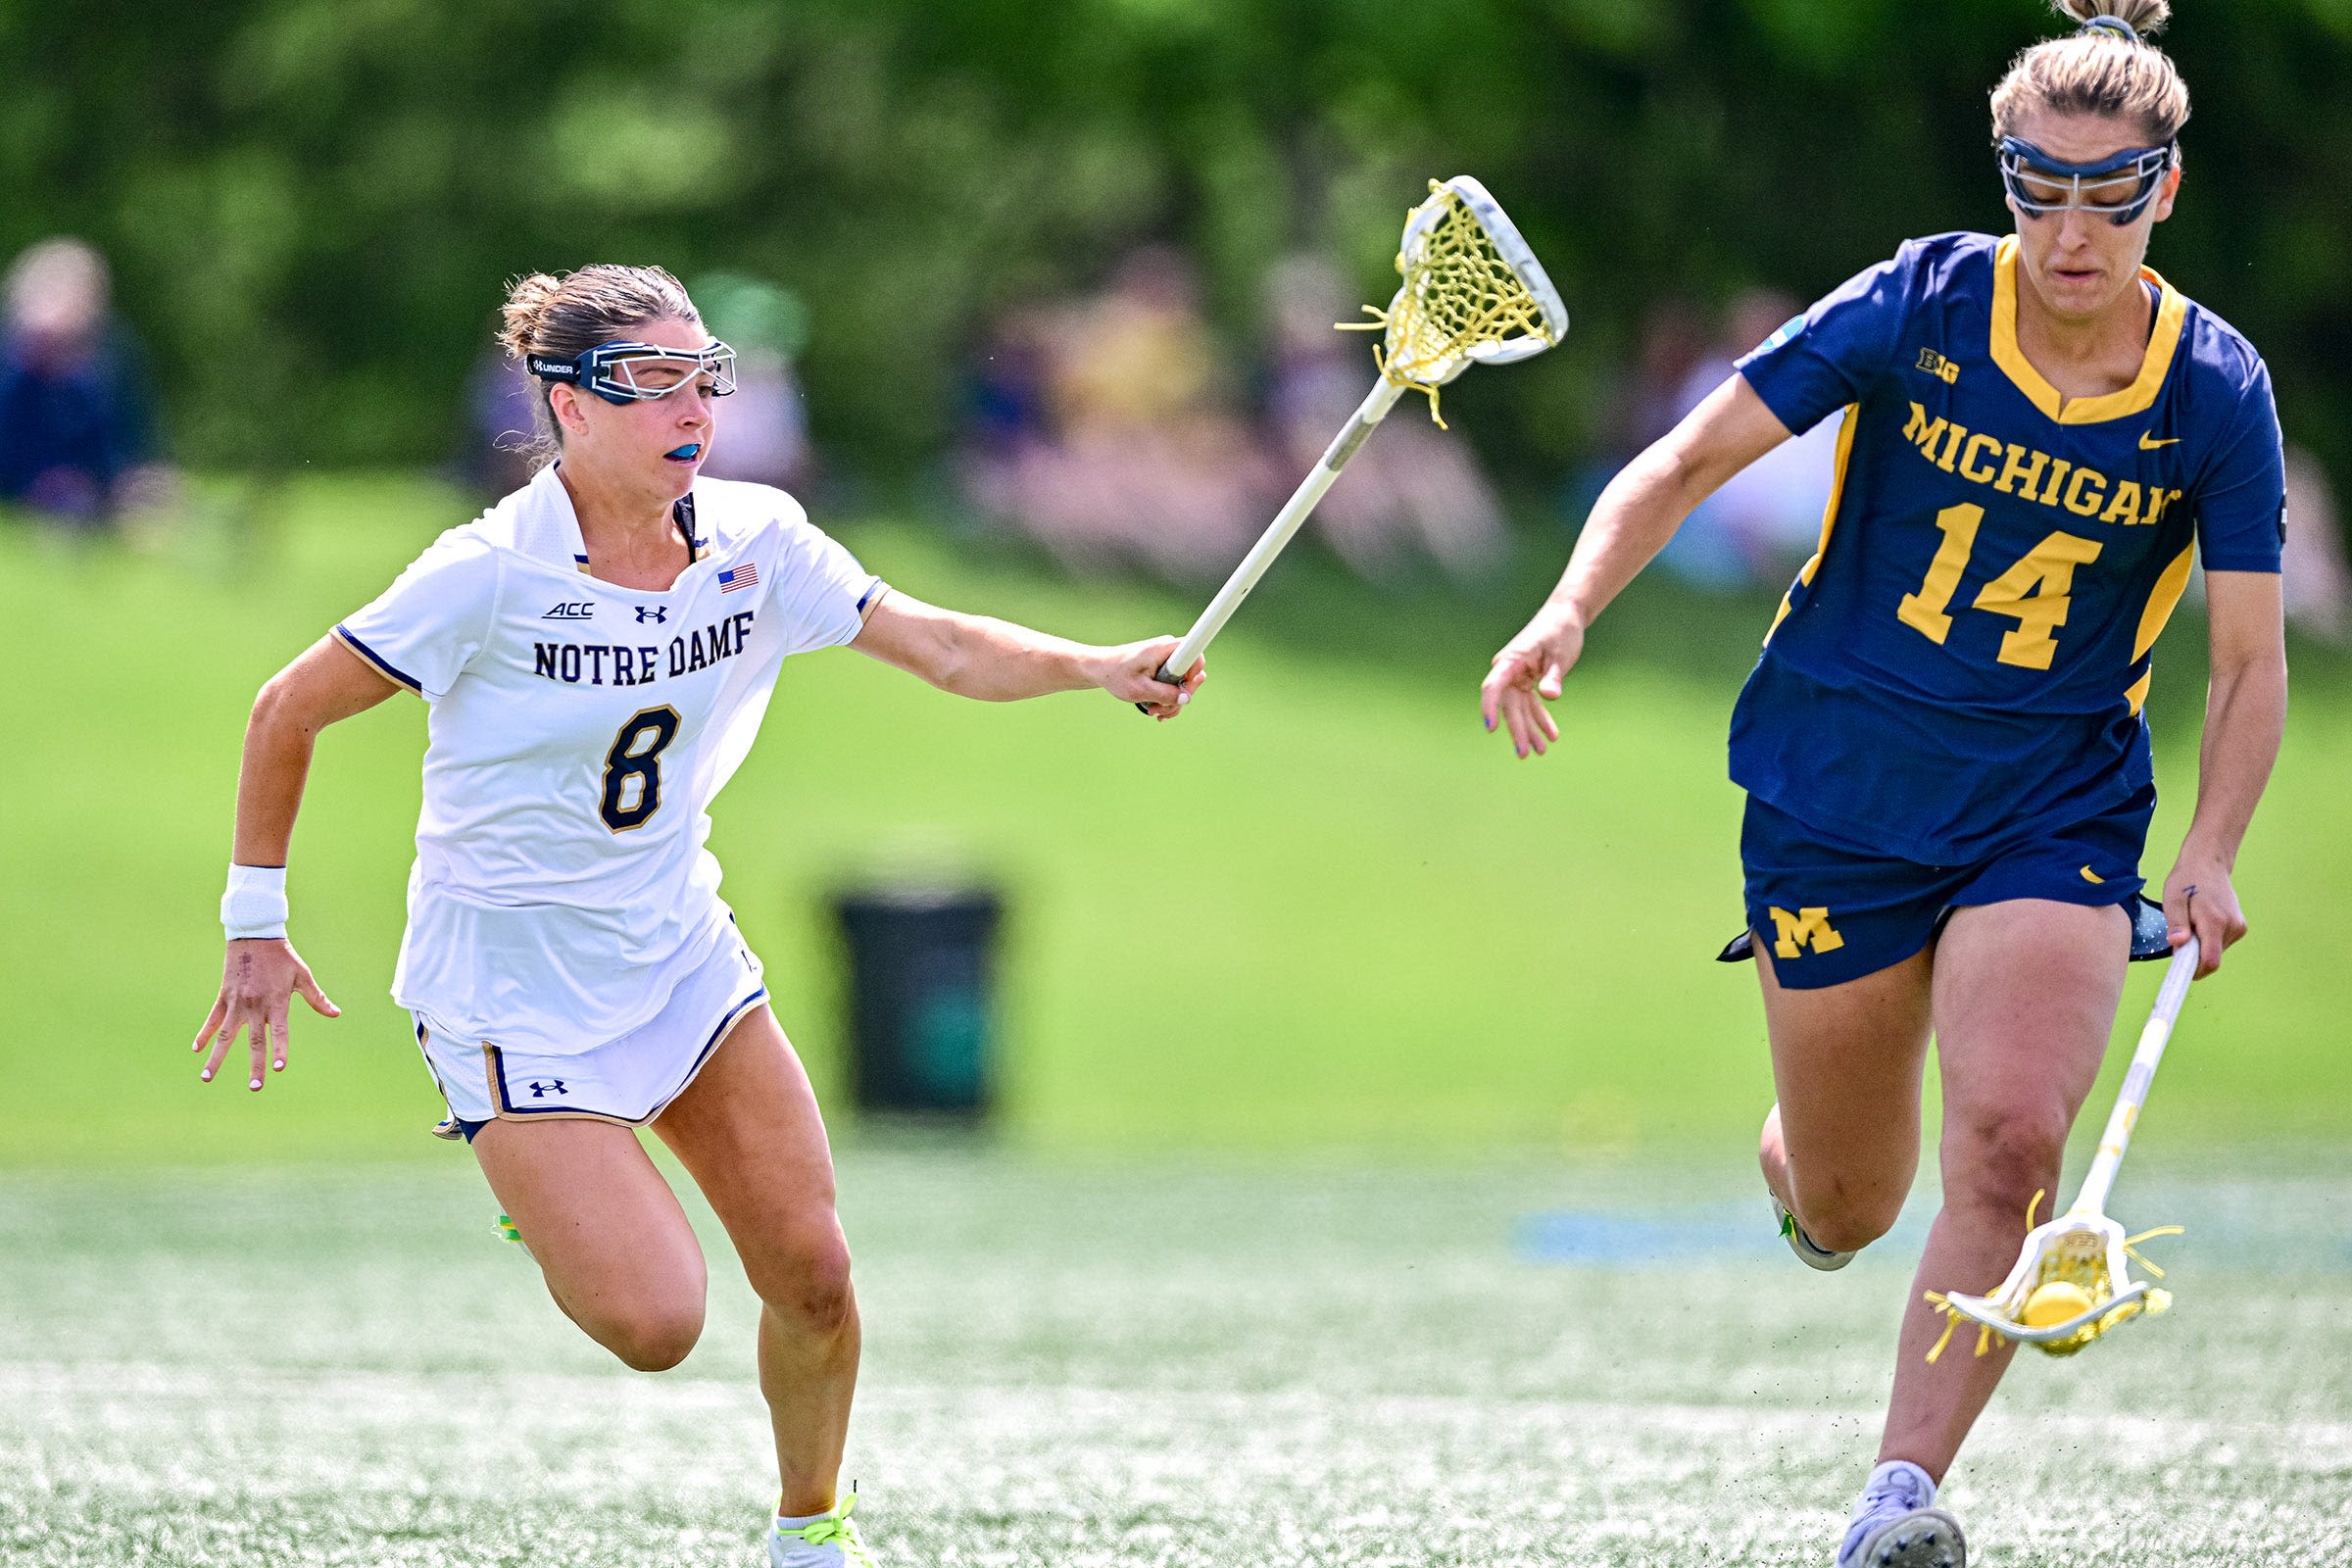 Michigan women's lacrosse scores in final second for first-ever NCAA quarterfinal berth